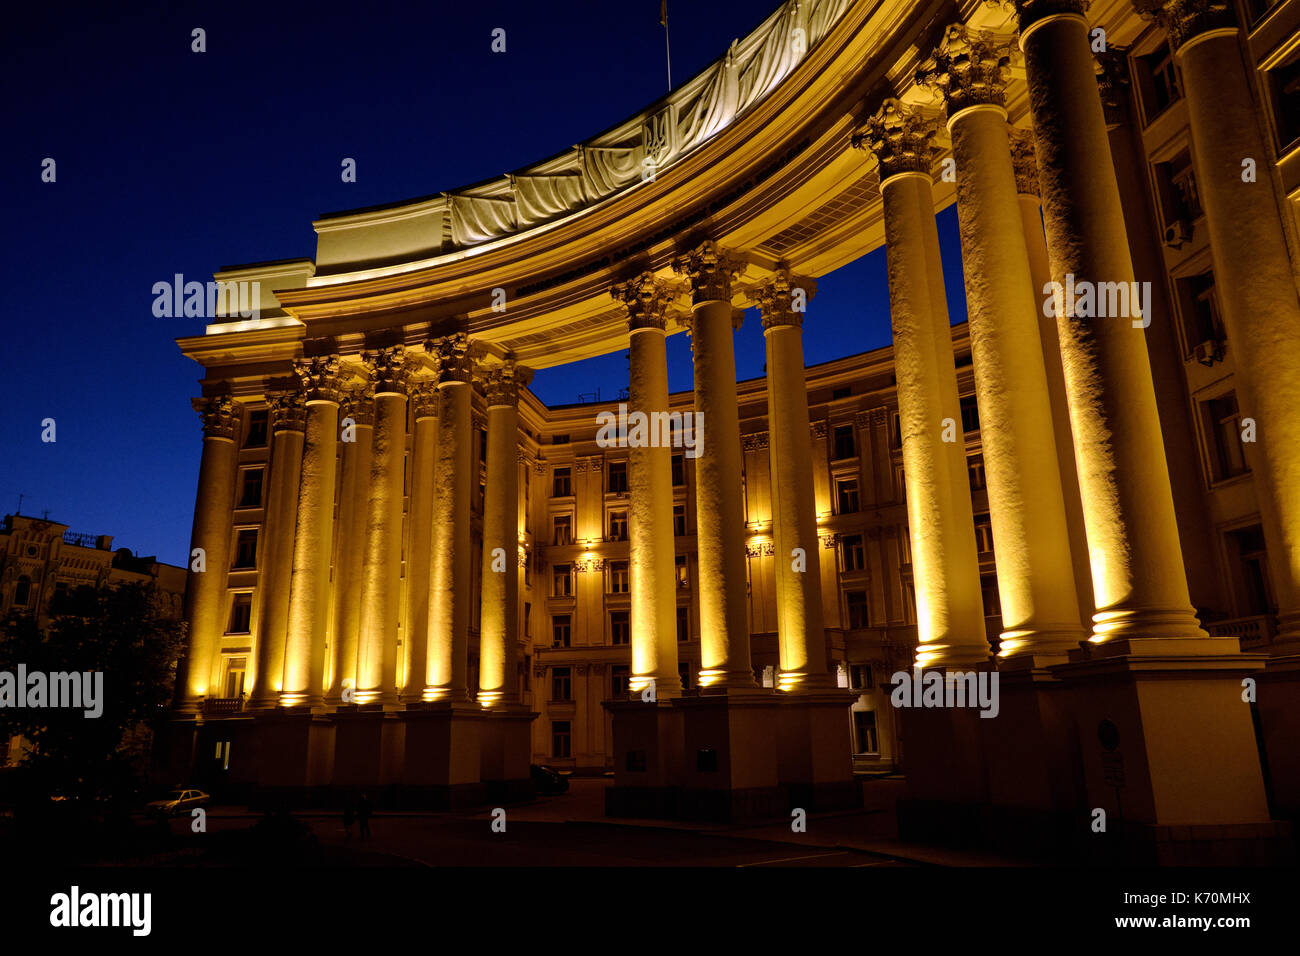 Kyiv, Ukraine - June 10, 2017: Illuminated building of the Ministry of Foreign Affairs of Ukraine at late evening against the blue sky Stock Photo